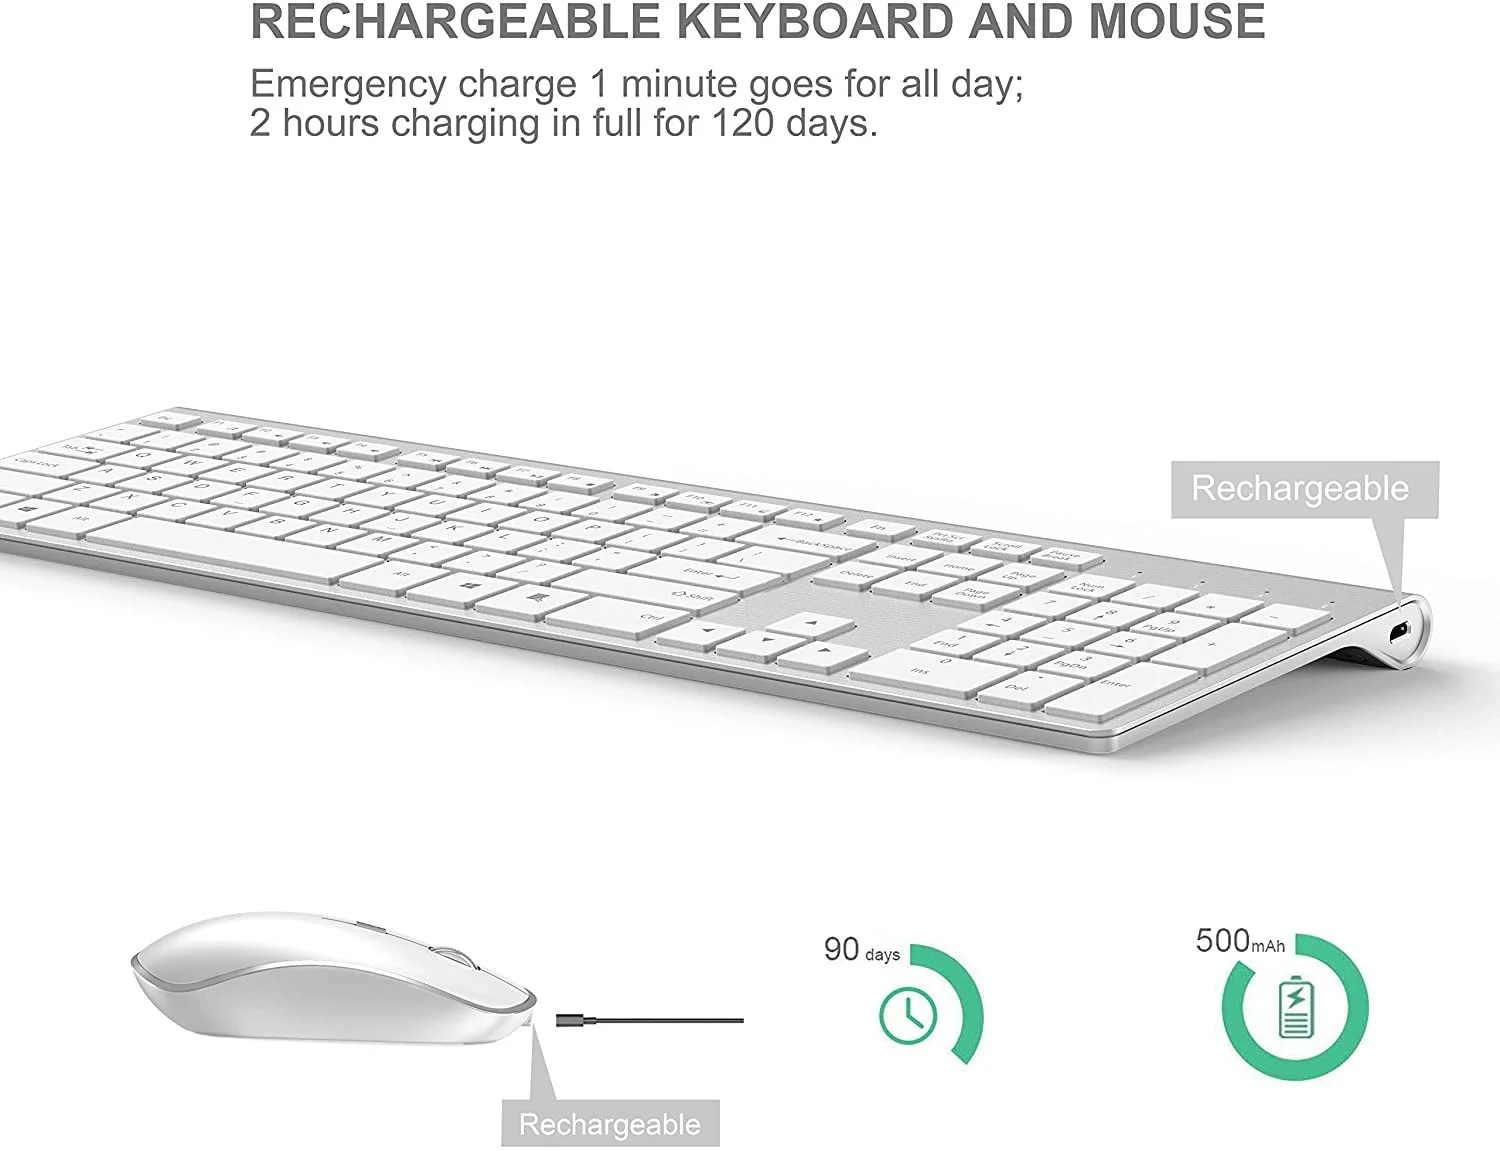 2.4G Rechargeable Wireless Keyboard And Mouse Ergonomic Full-Size Design Russian/English/German/French Laptop/PC/ Windows，Silver enlarge